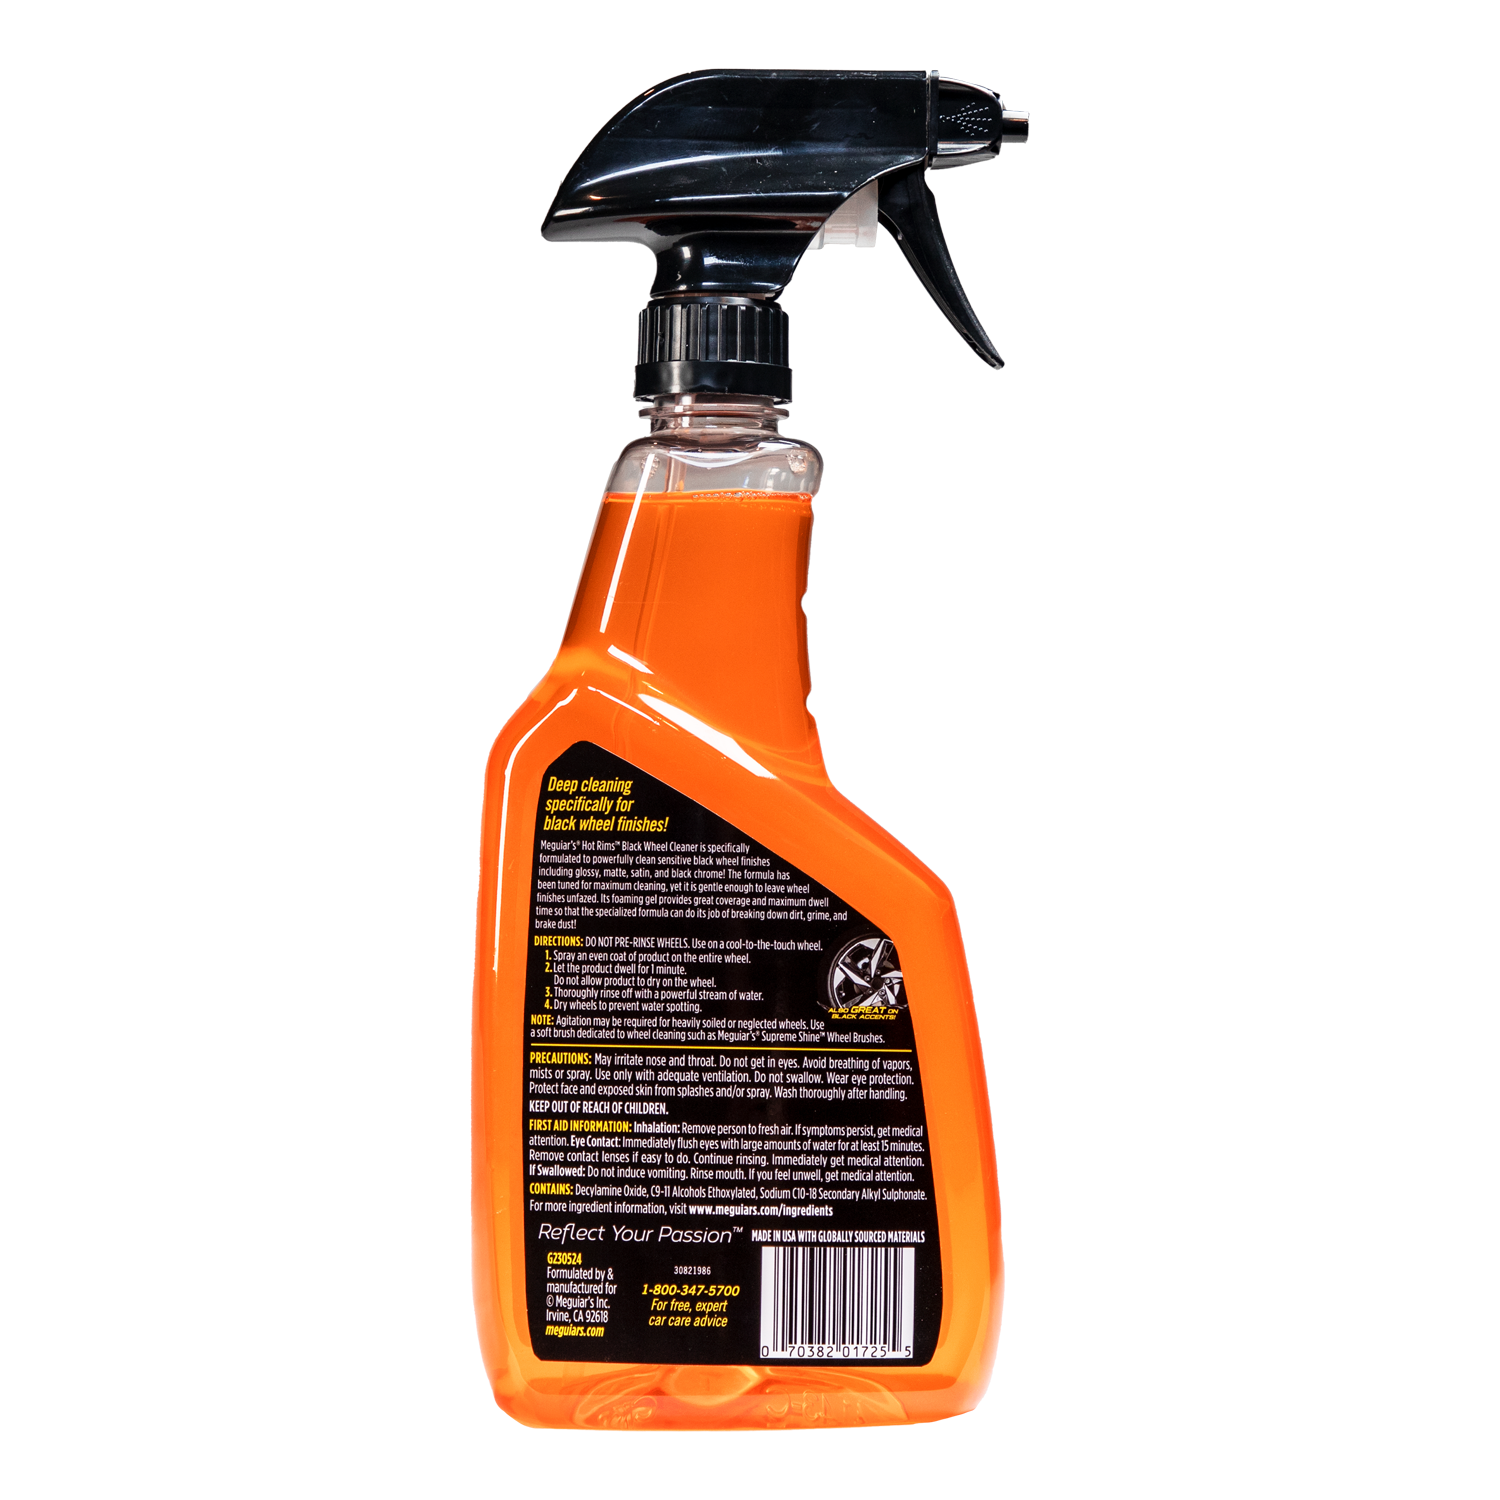 Meguiars Ultimate All Wheel Cleaner 24oz | Color Changing